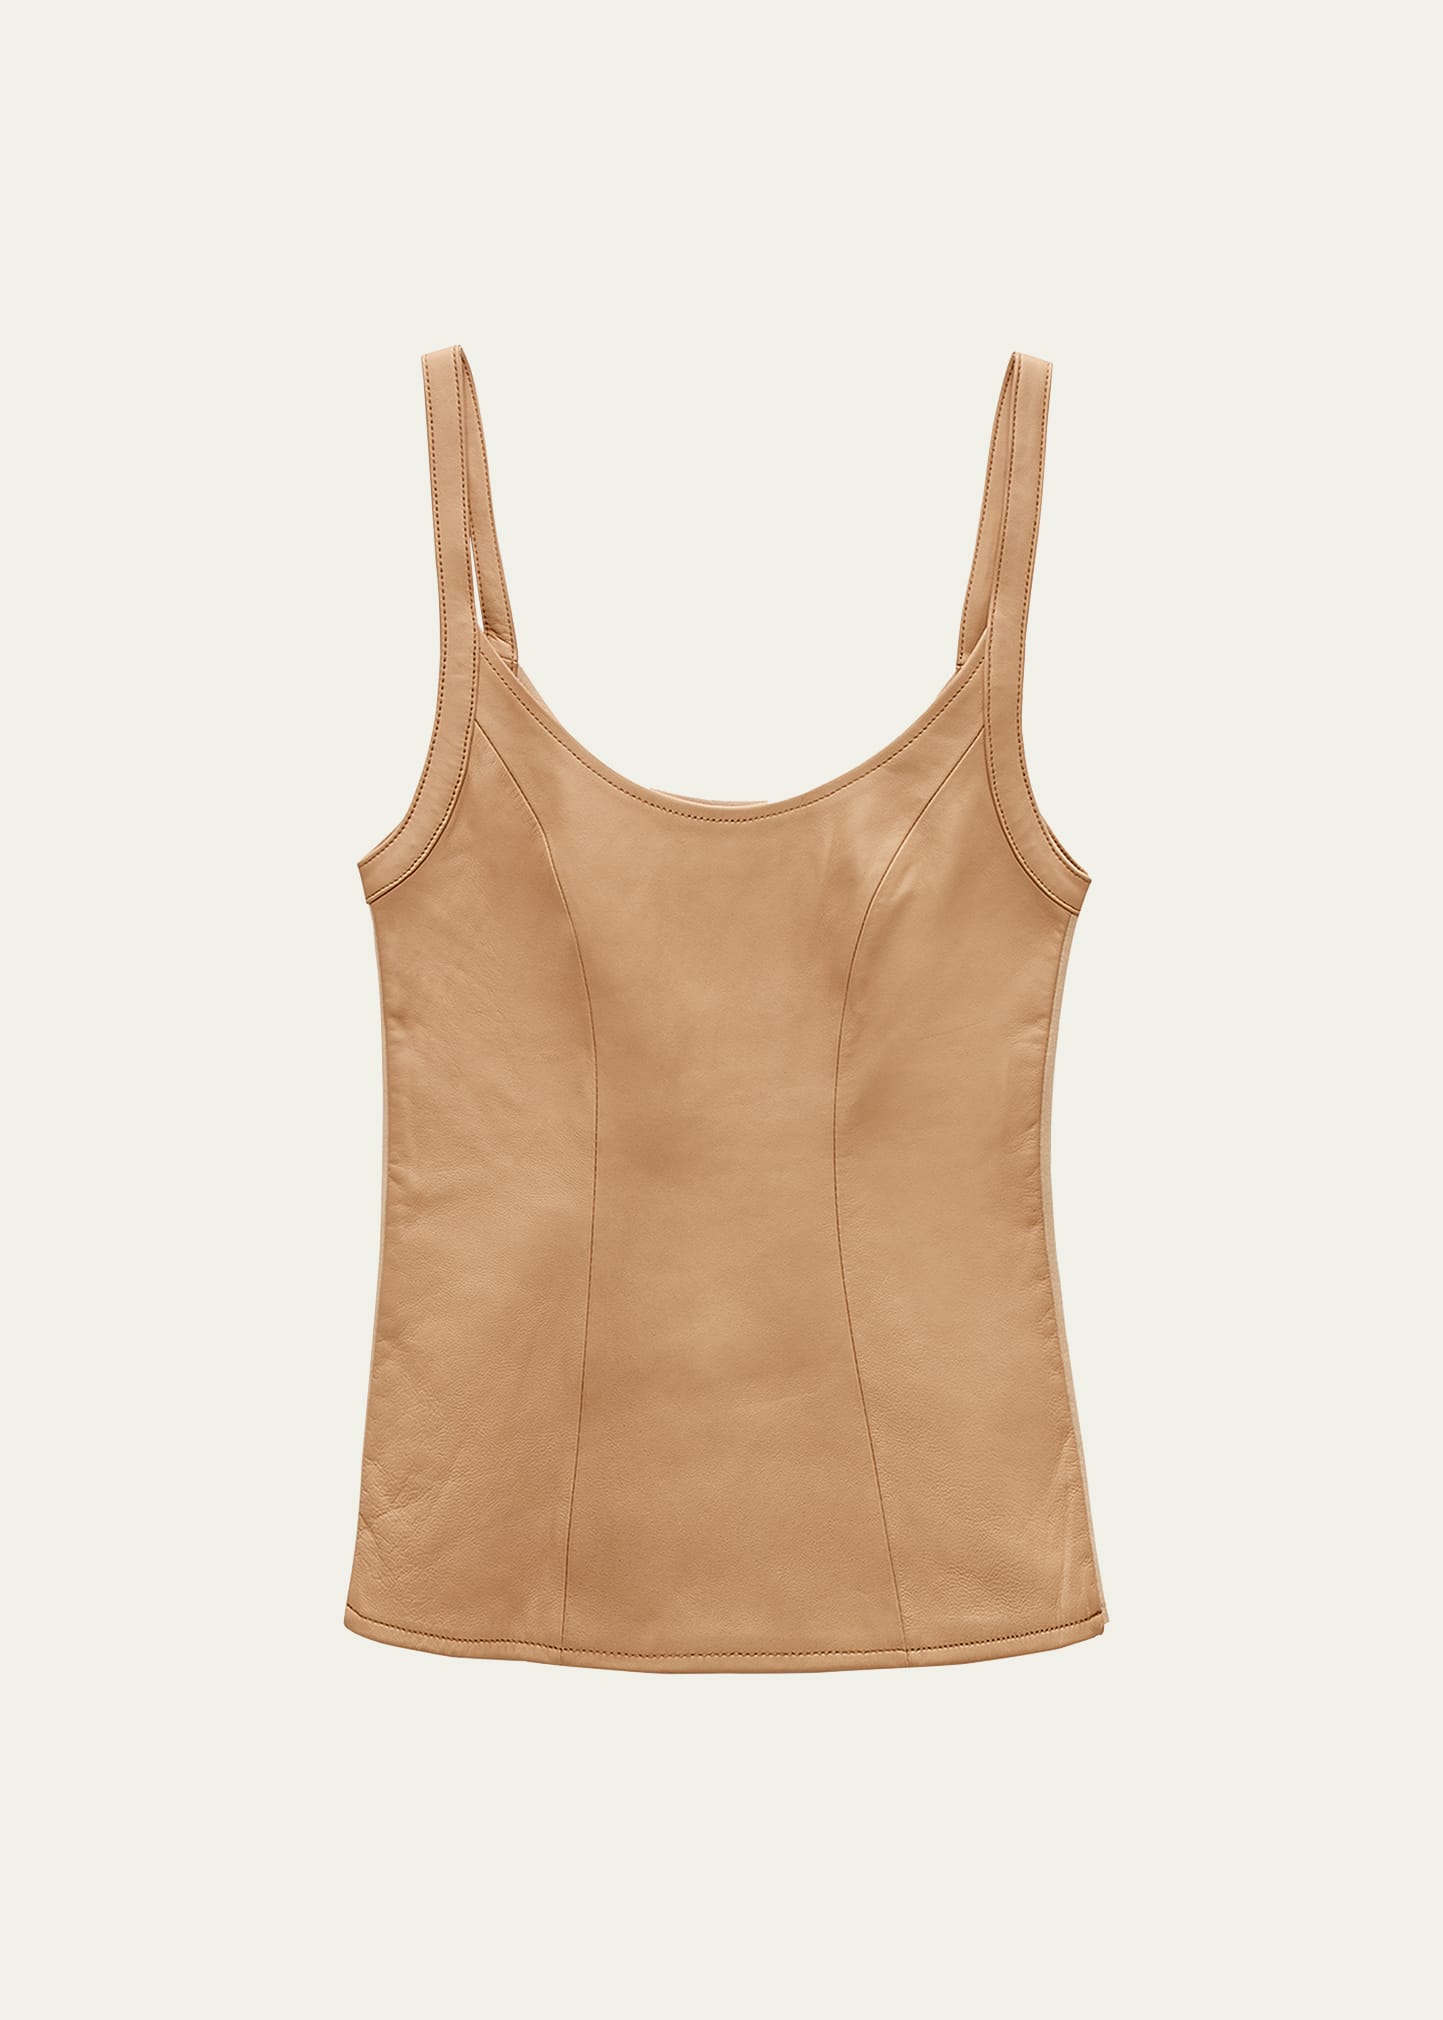 AS by DF Jordan Scoop-Neck Recycled Leather Top